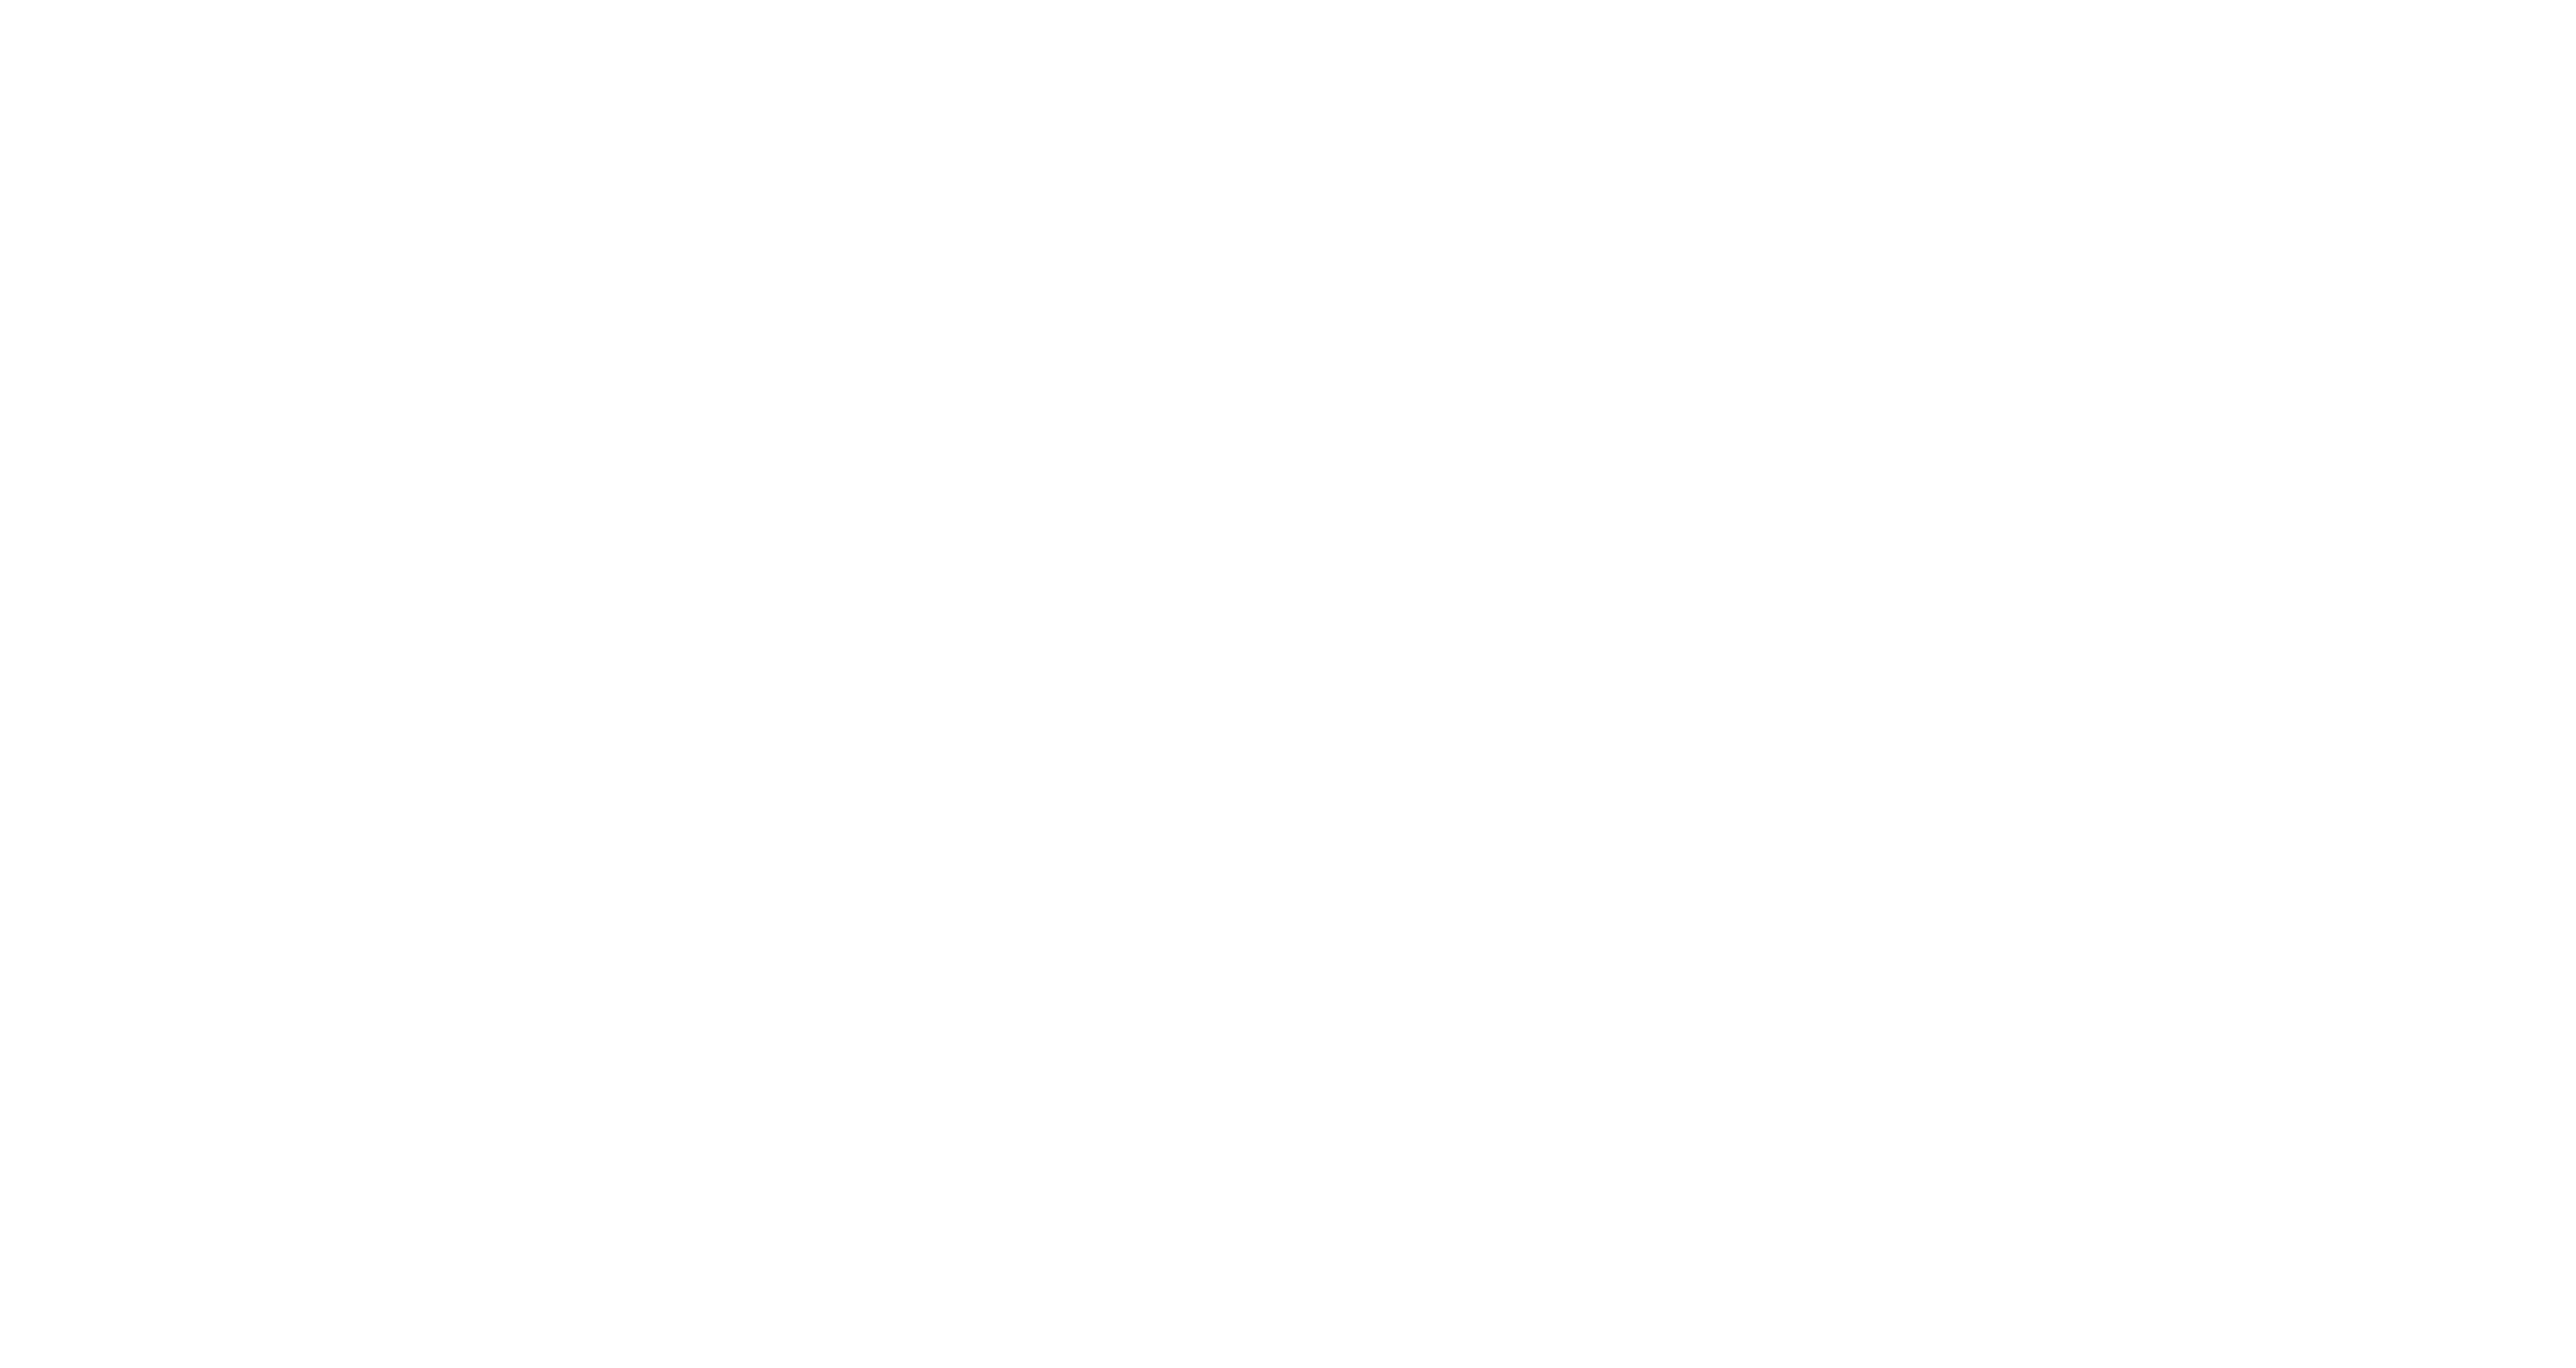 Oklahoma Rehabilitation Services Library for the Blind and Physically Handicapped